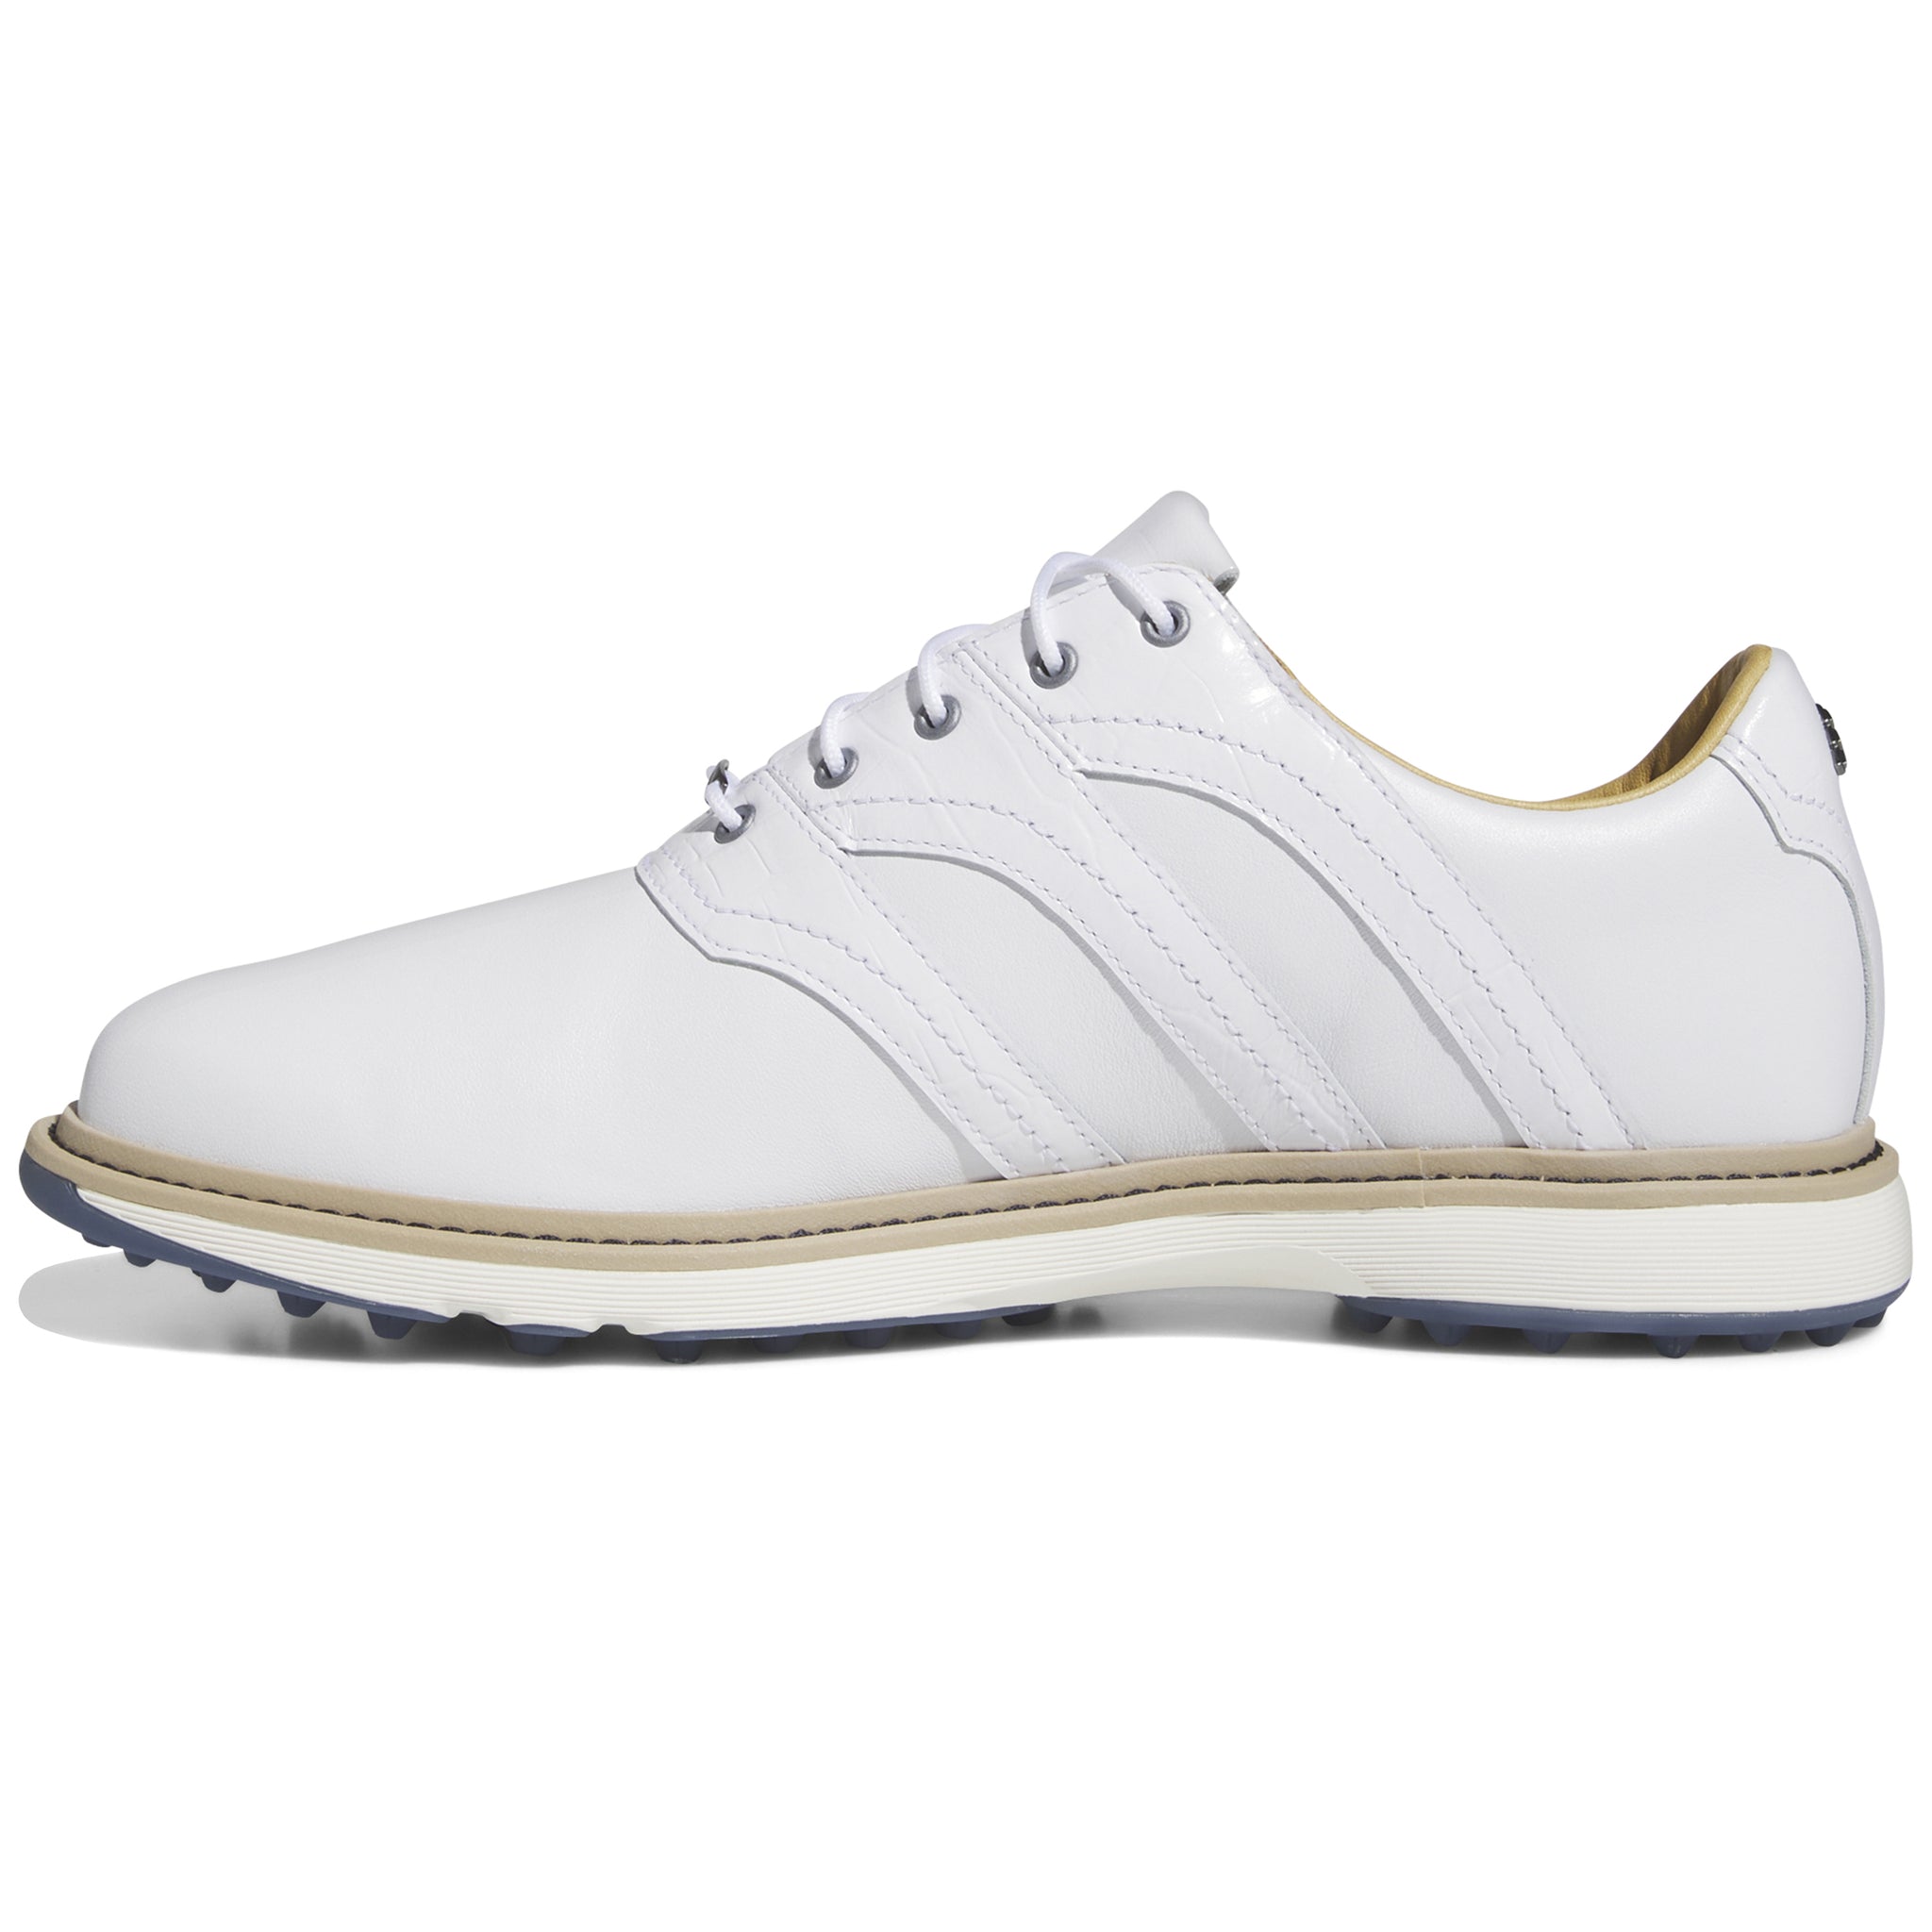 adidas-mc80-z-traxion-golf-shoes-if2713-white-preloved-ink